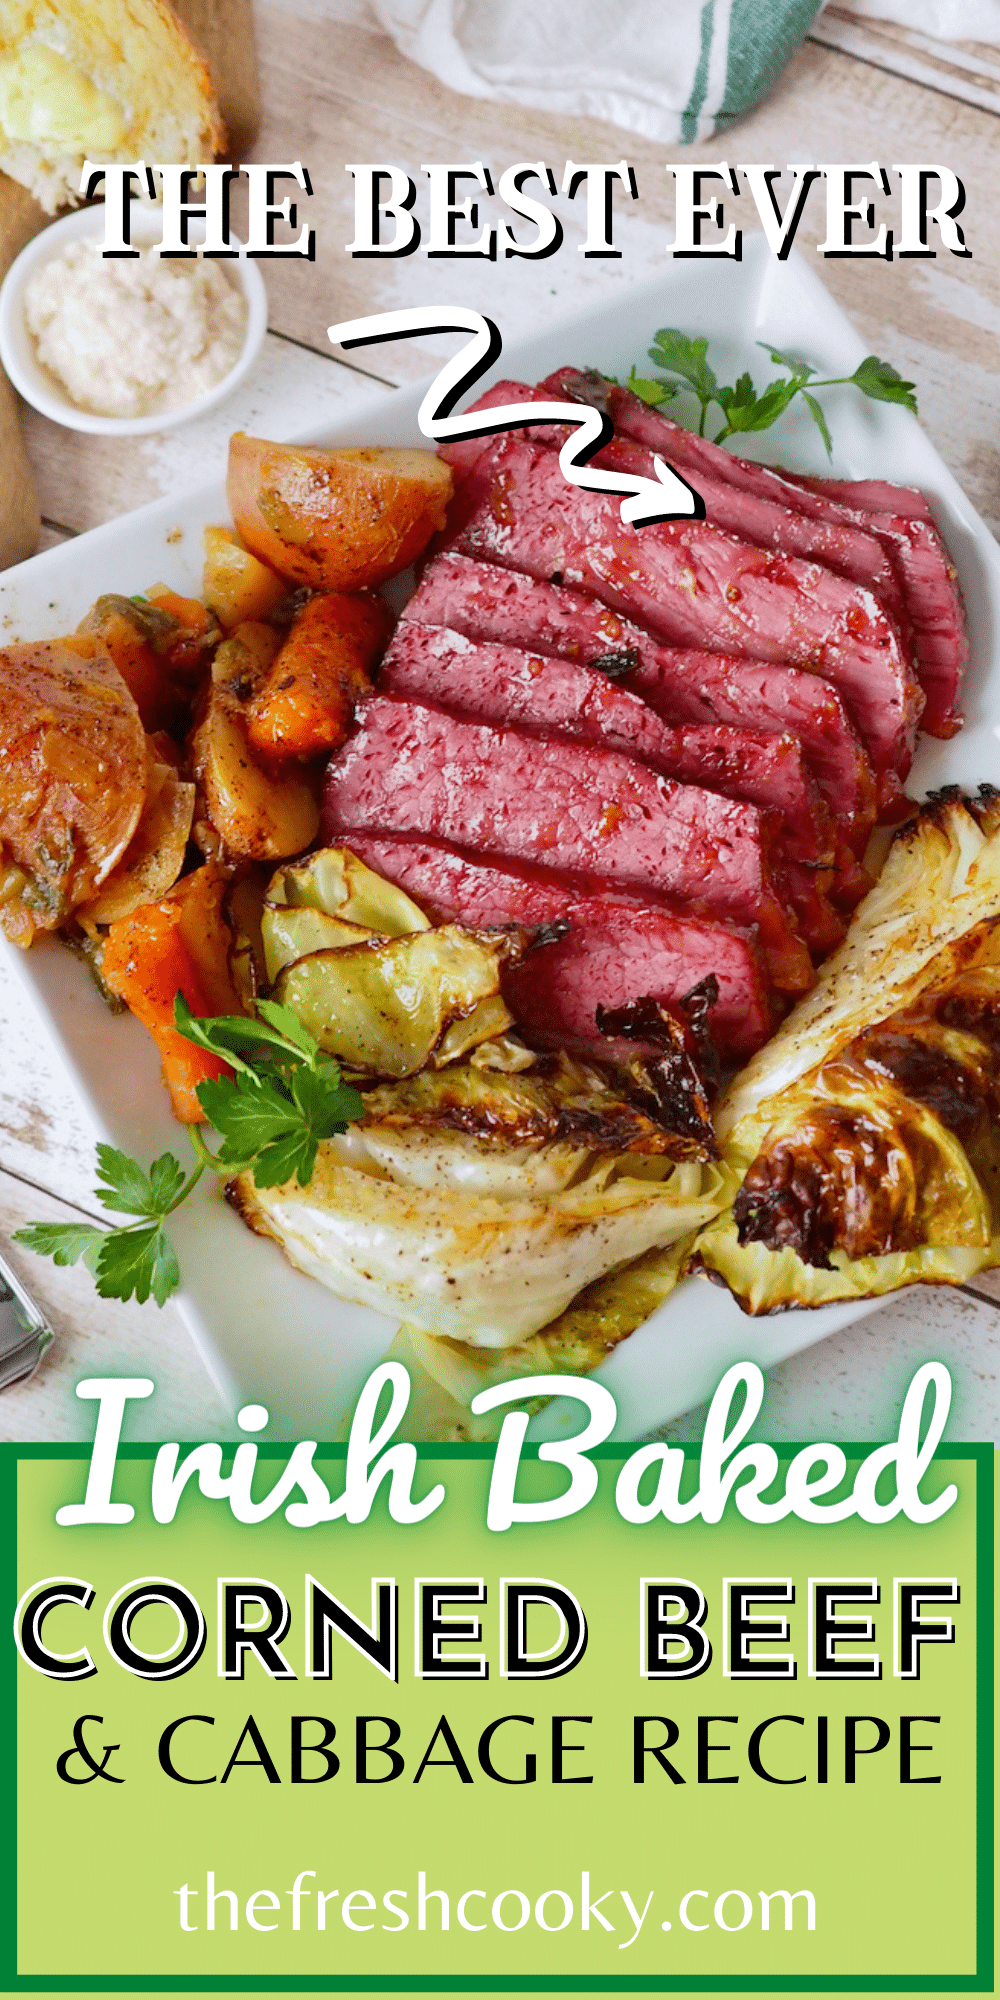 Pin for Irish Baked Corned Beef and Cabbage Recipe with image of corned beef sliced on a platter with potatoes, carrots and cabbage.